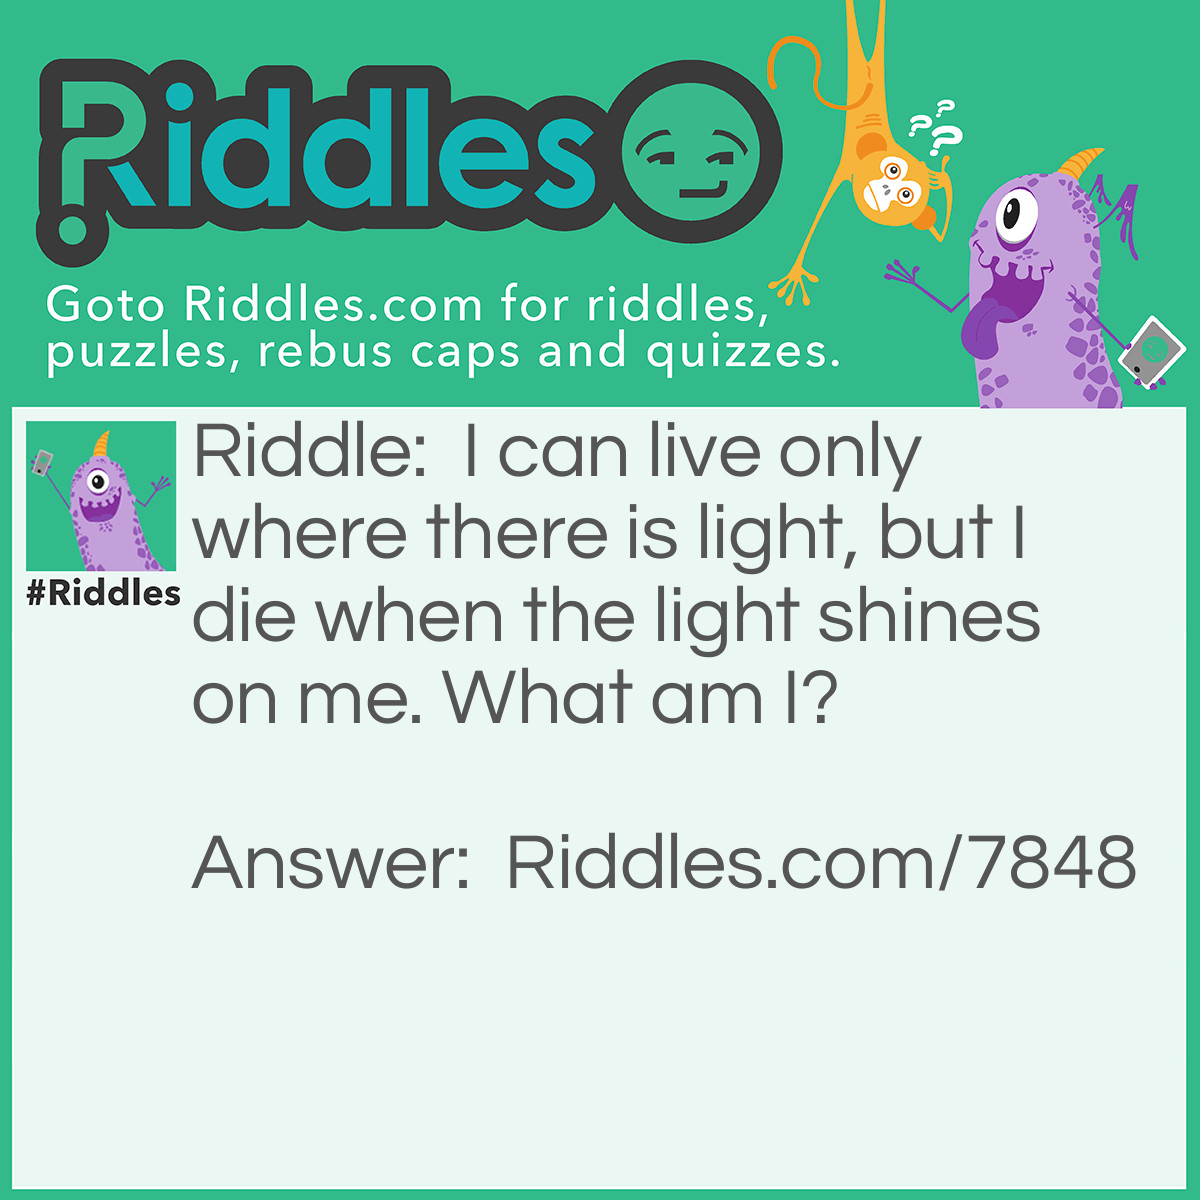 Riddle: I can live only where there is light, but I die when the light shines on me. What am I? Answer: A Shadow